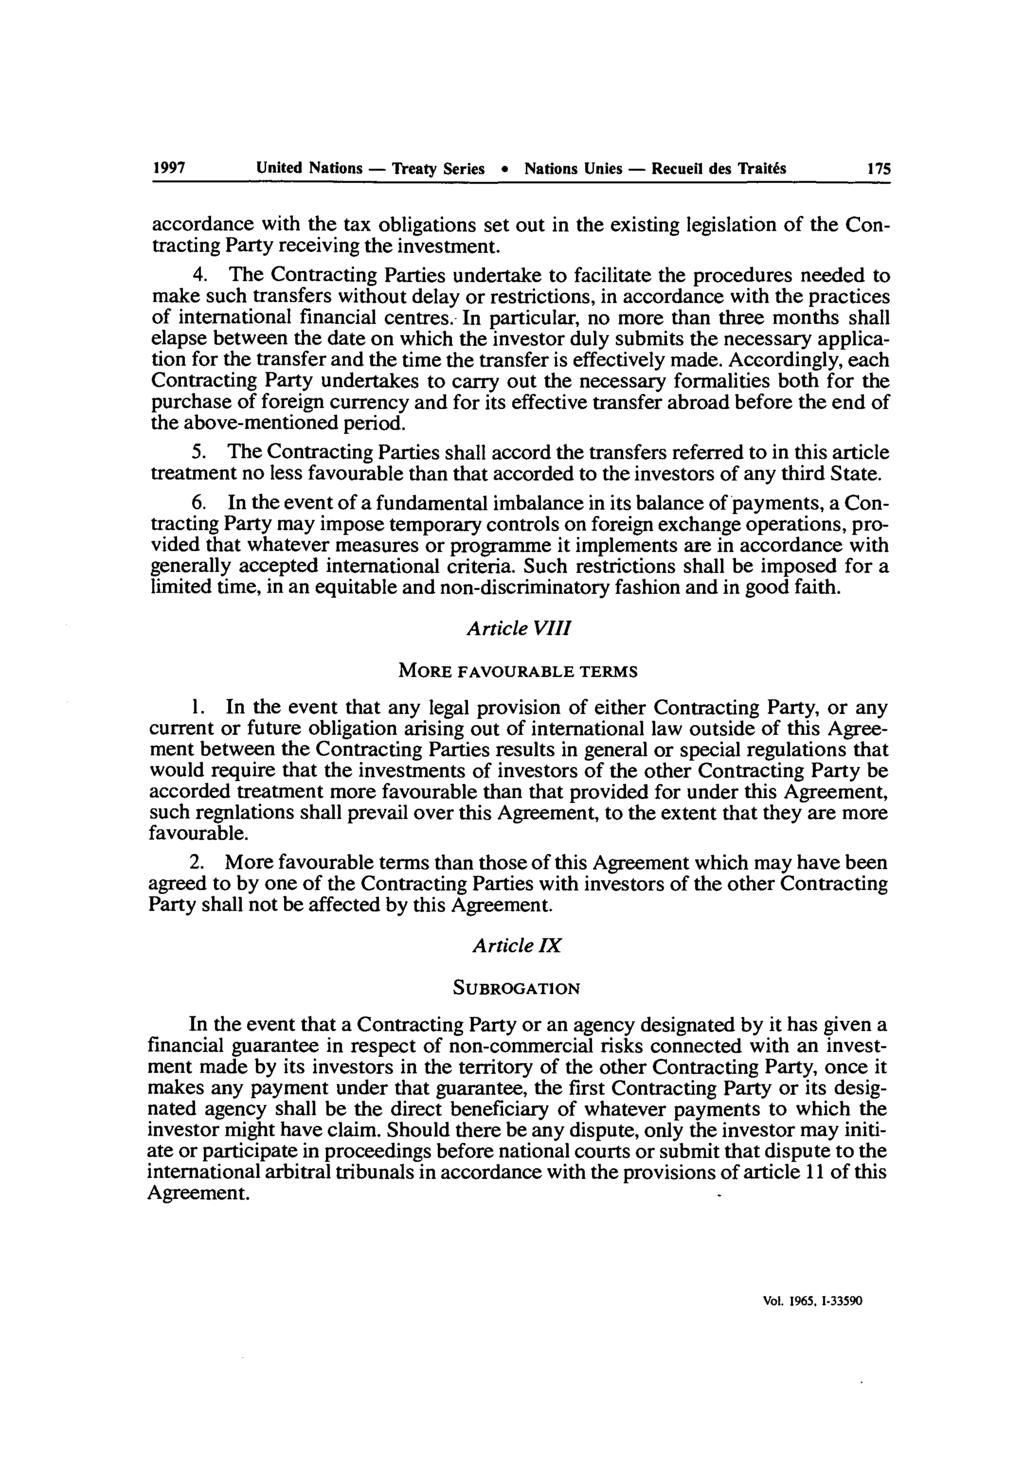 1997 United Nations- Treaty Series Nations Unies- Recueil des Traites 175 accordance with the tax obligations set out in the existing legislation of the Contracting Party receiving the investment. 4.